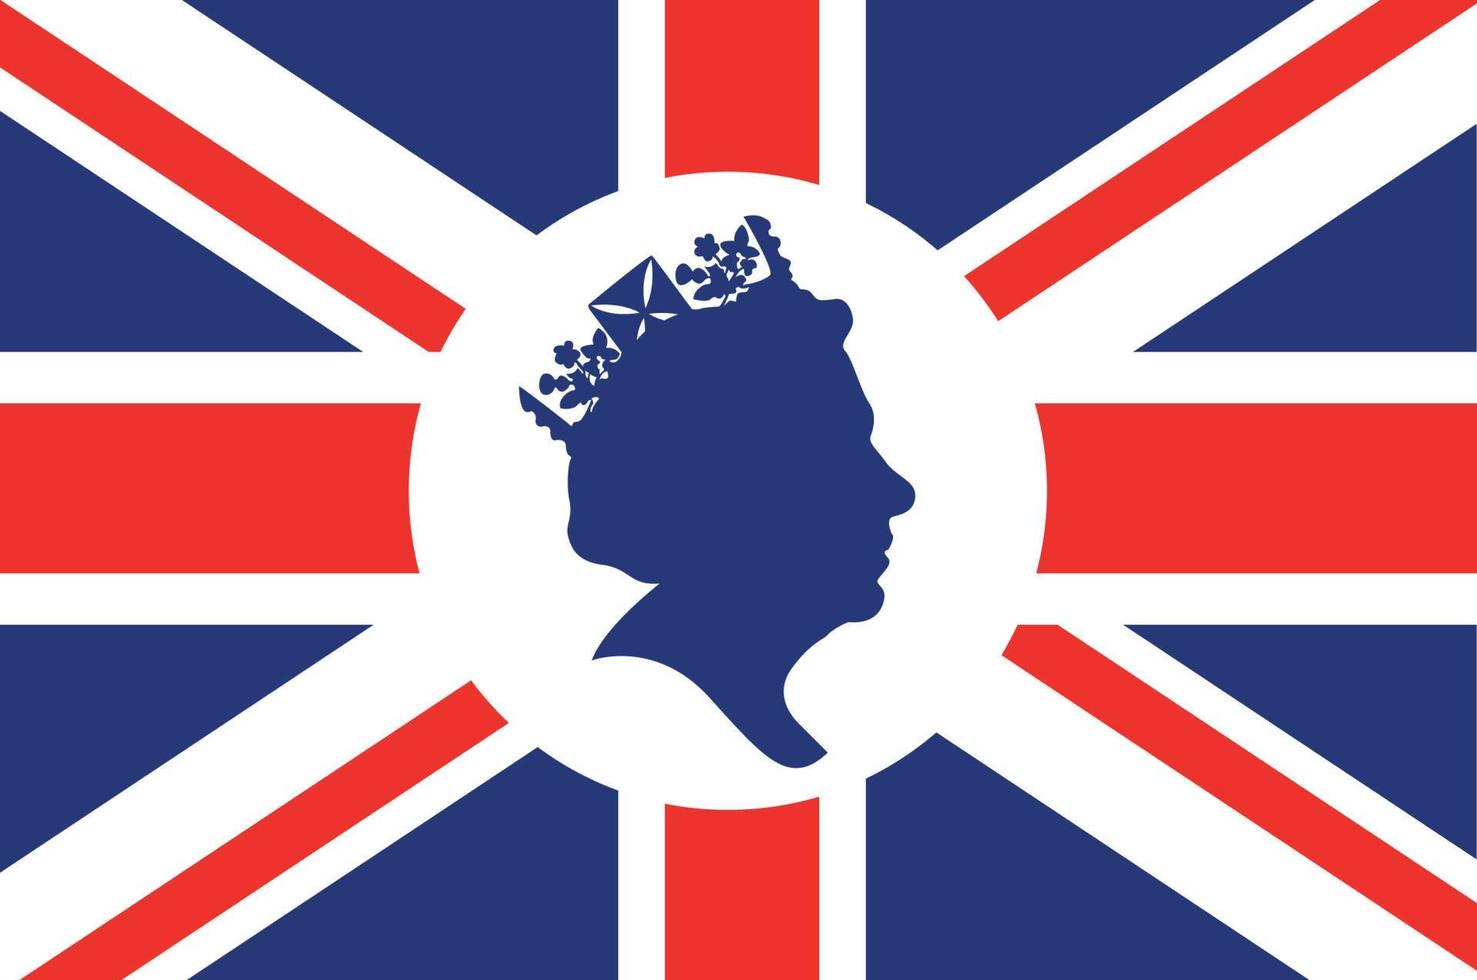 Queen Elizabeth Face White And Blue With British United Kingdom Flag National Europe Emblem Icon Vector Illustration Abstract Design Element